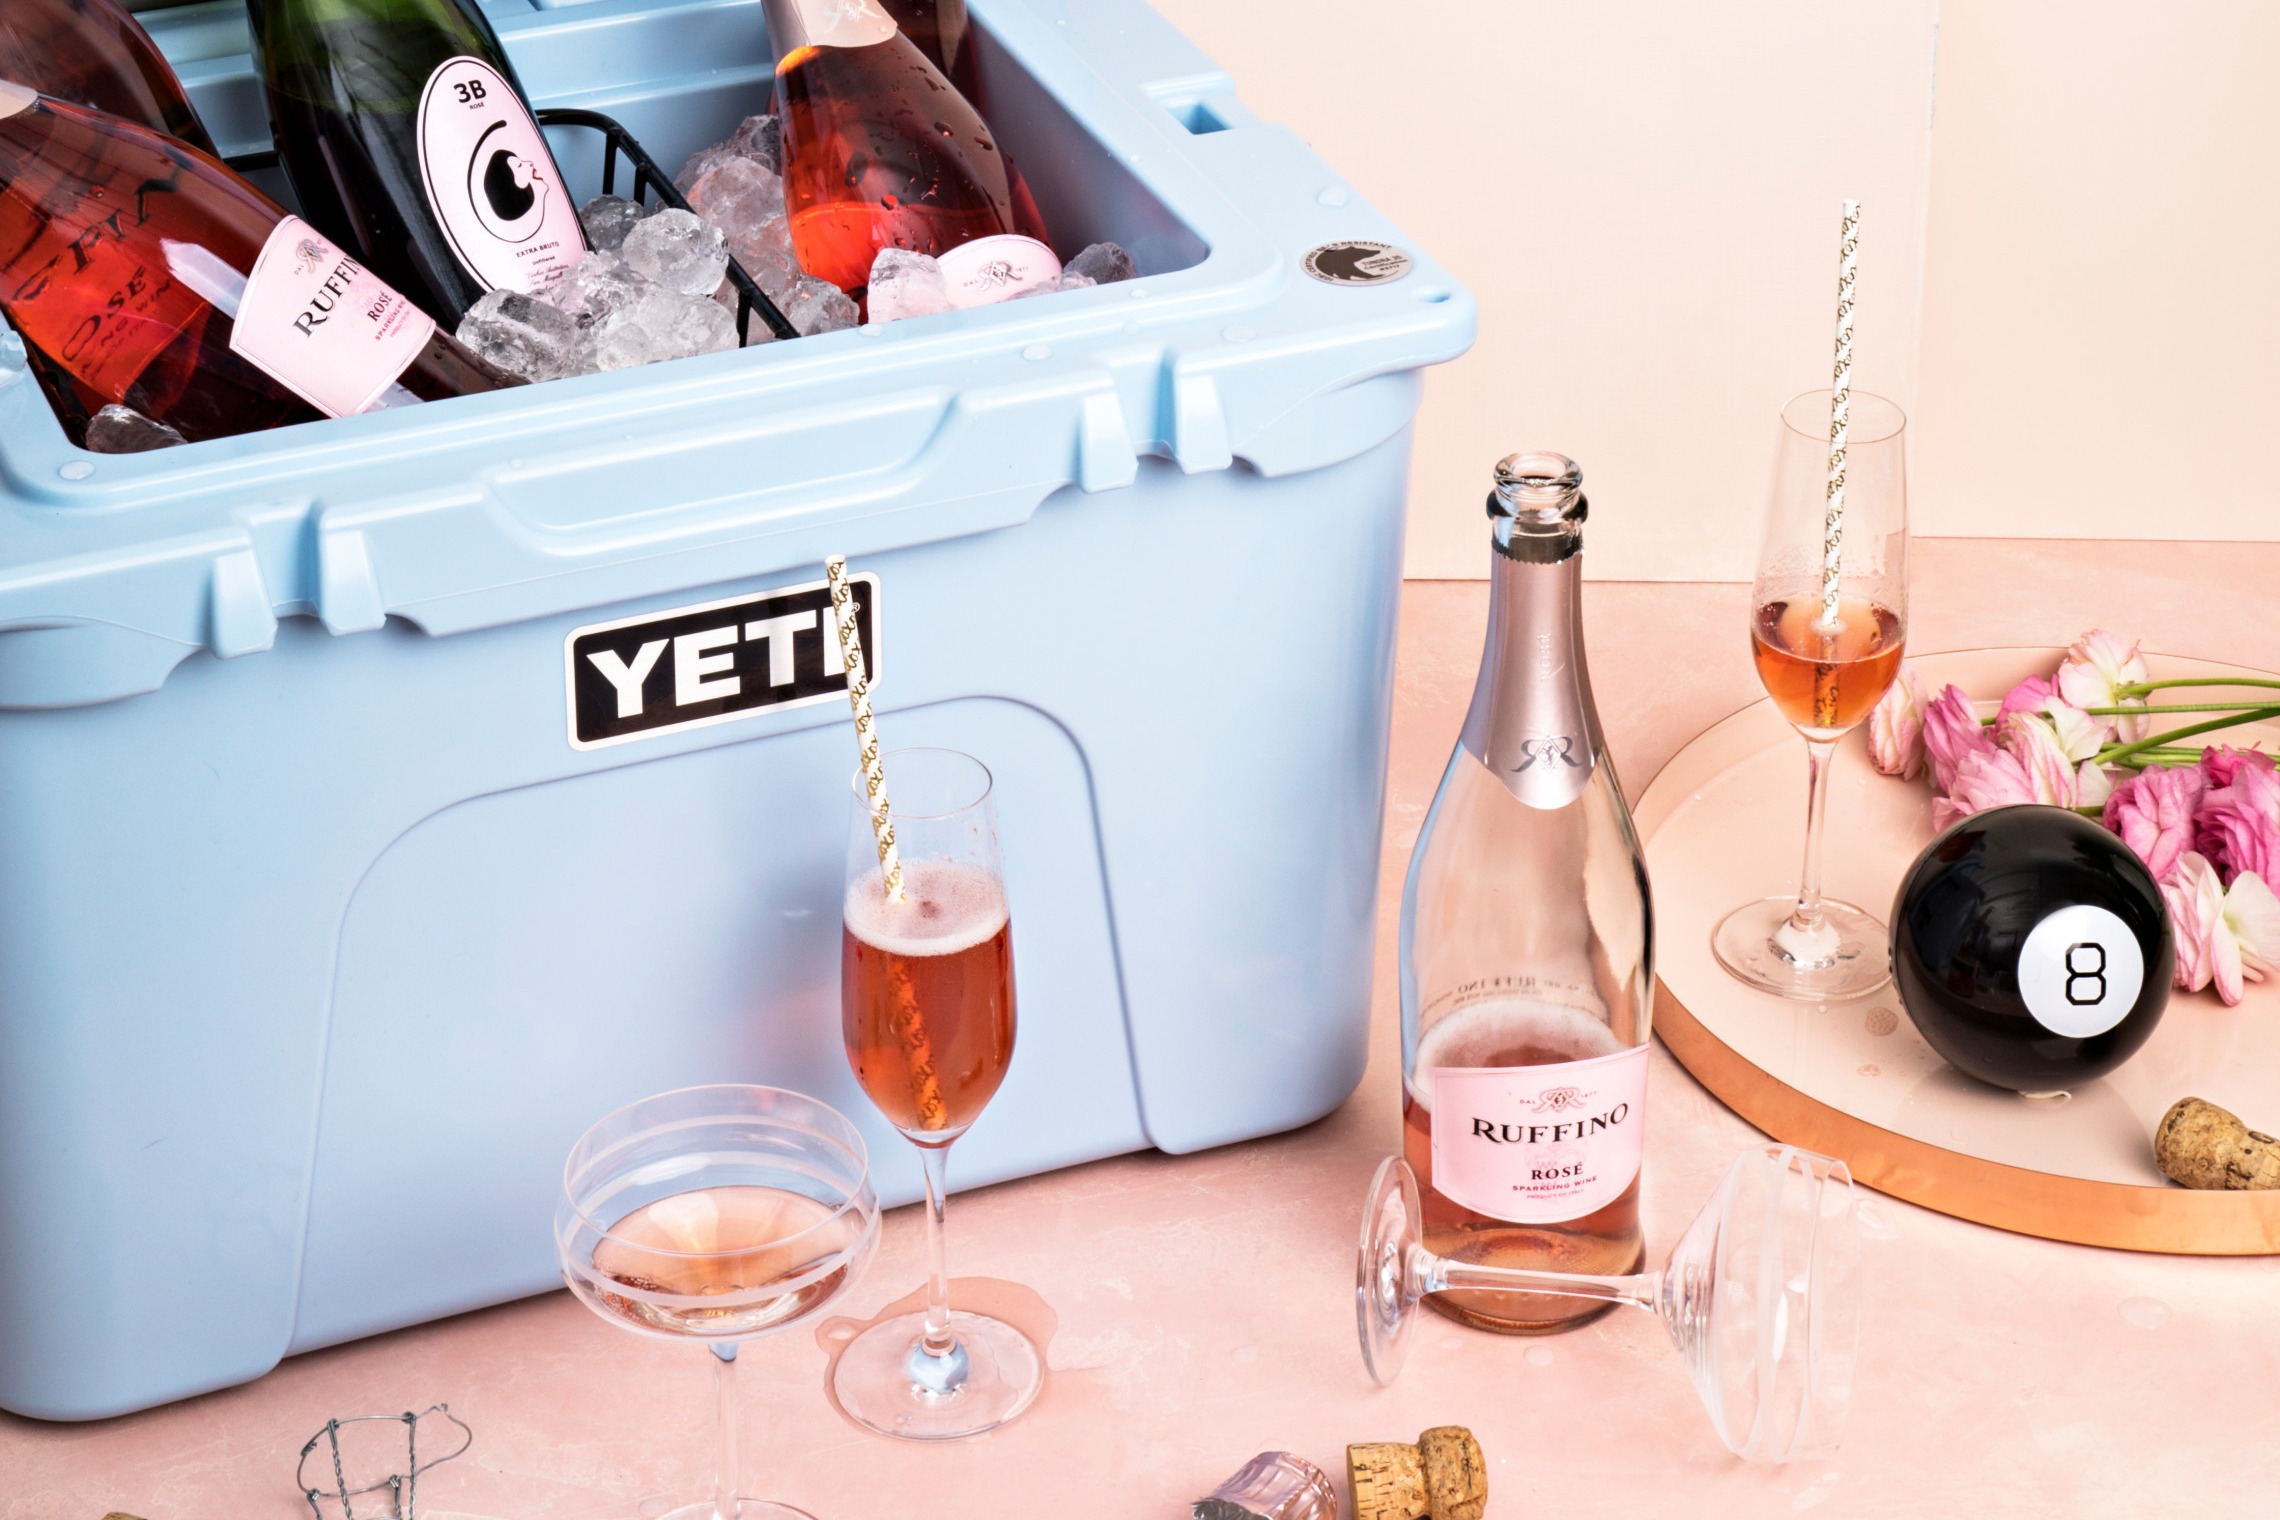 Yeti cooler filled with bottles of sparkling rose wine and glasses filled with wine in the background